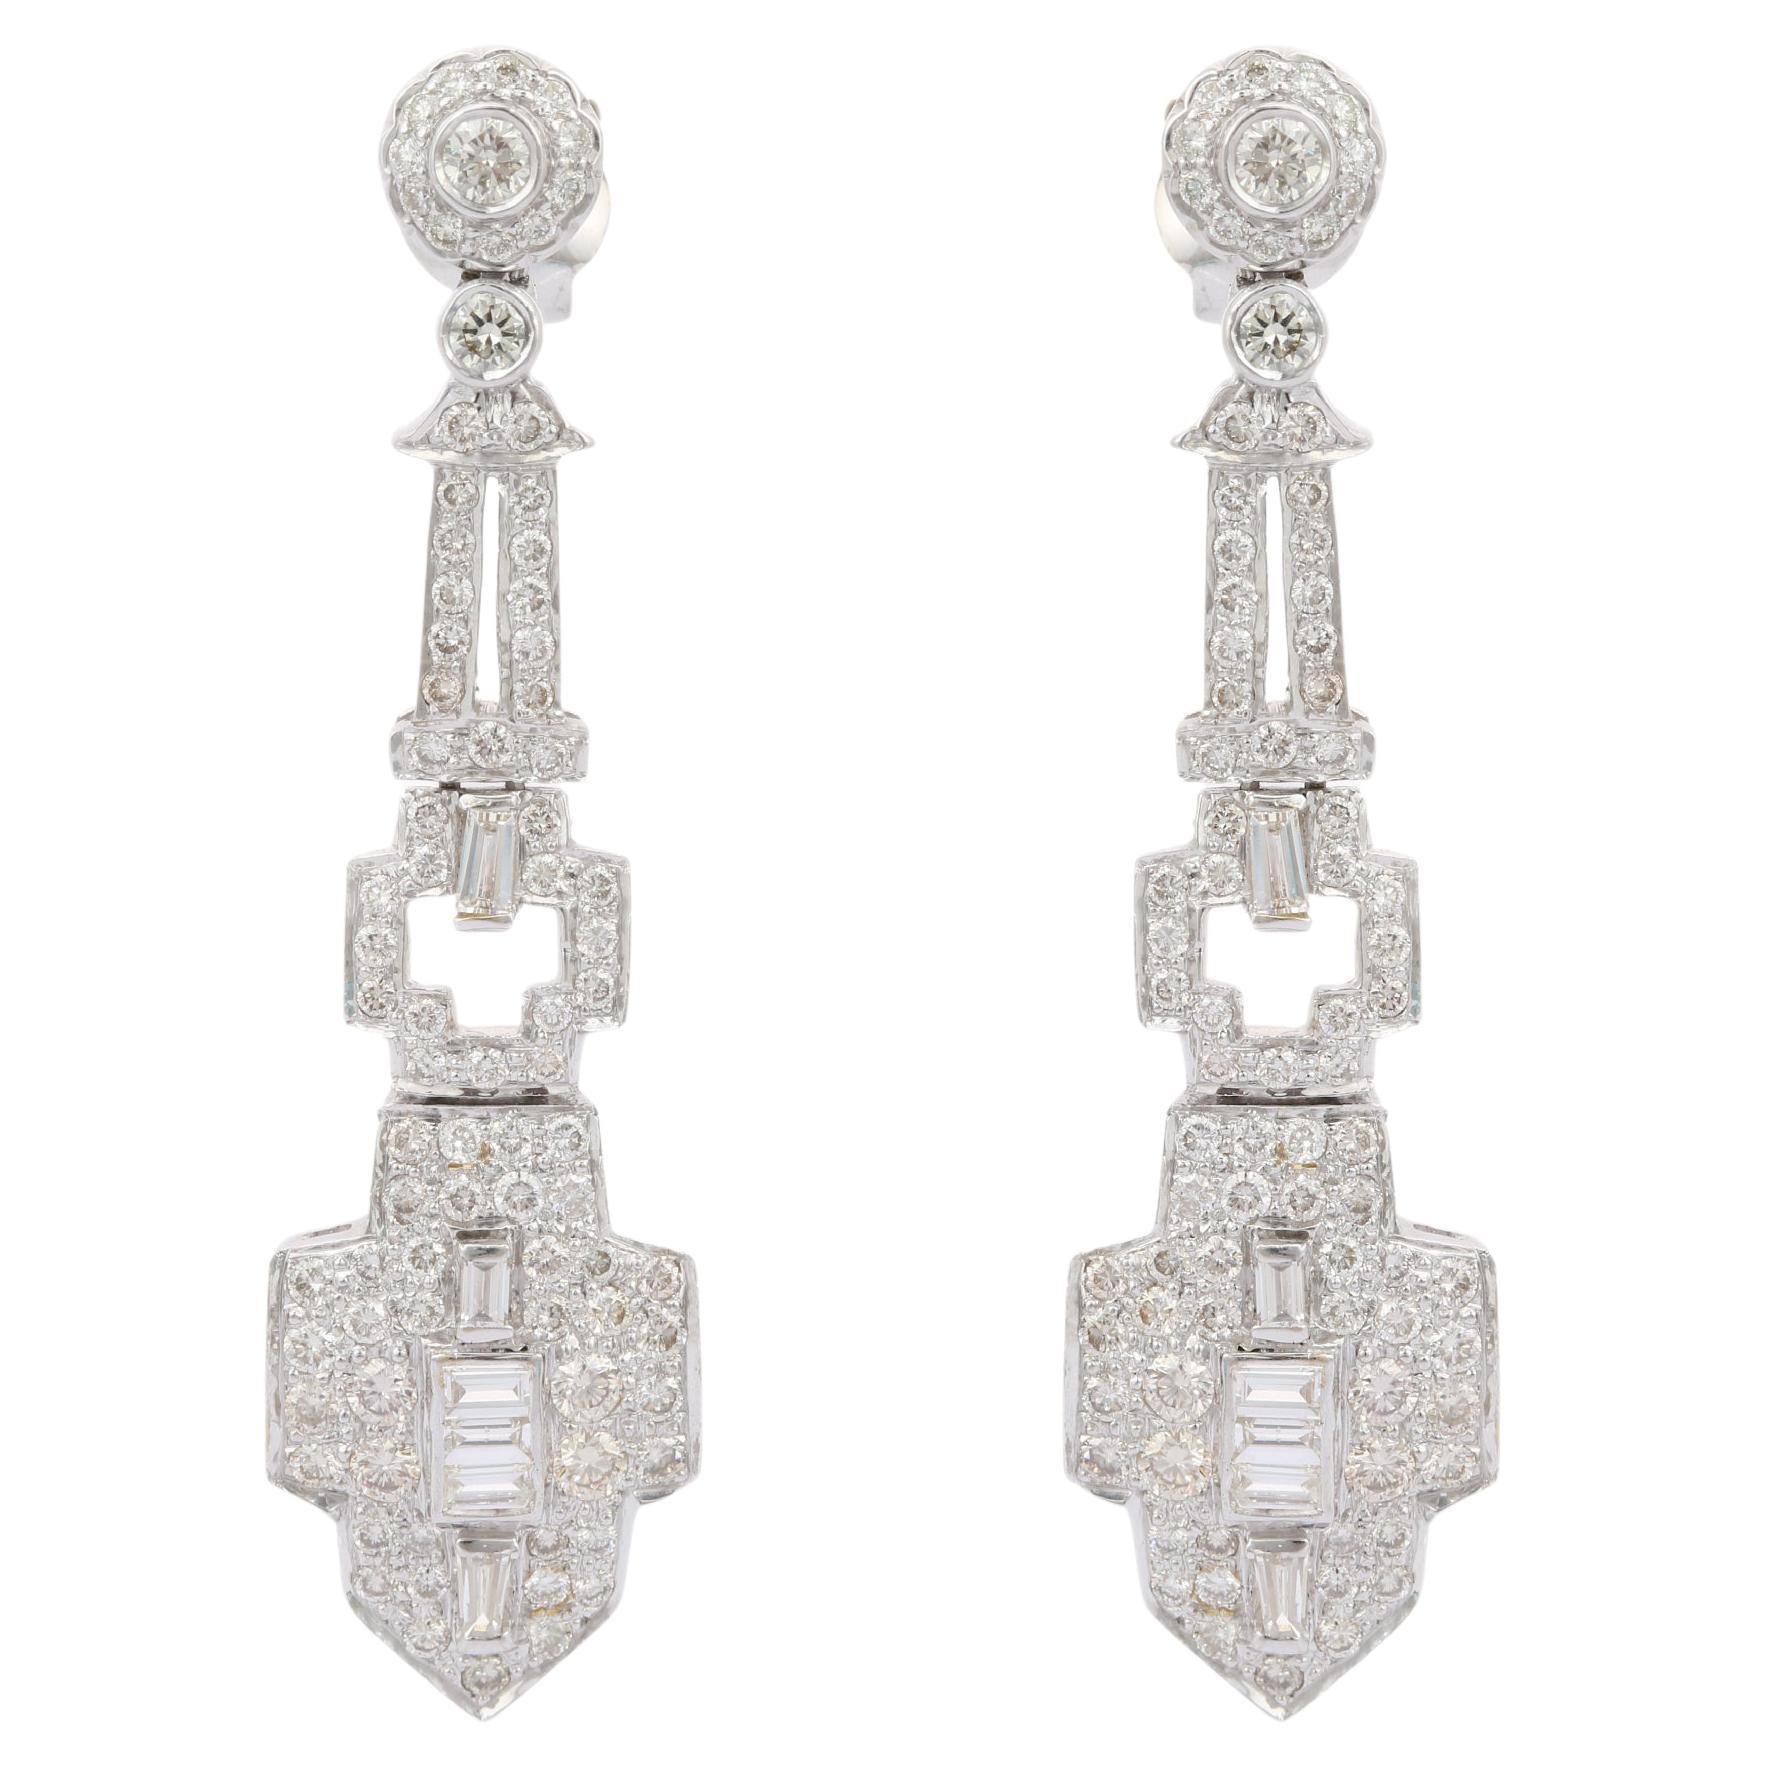 Exquisite Diamond Dangle Earrings in 18kt Solid White Gold